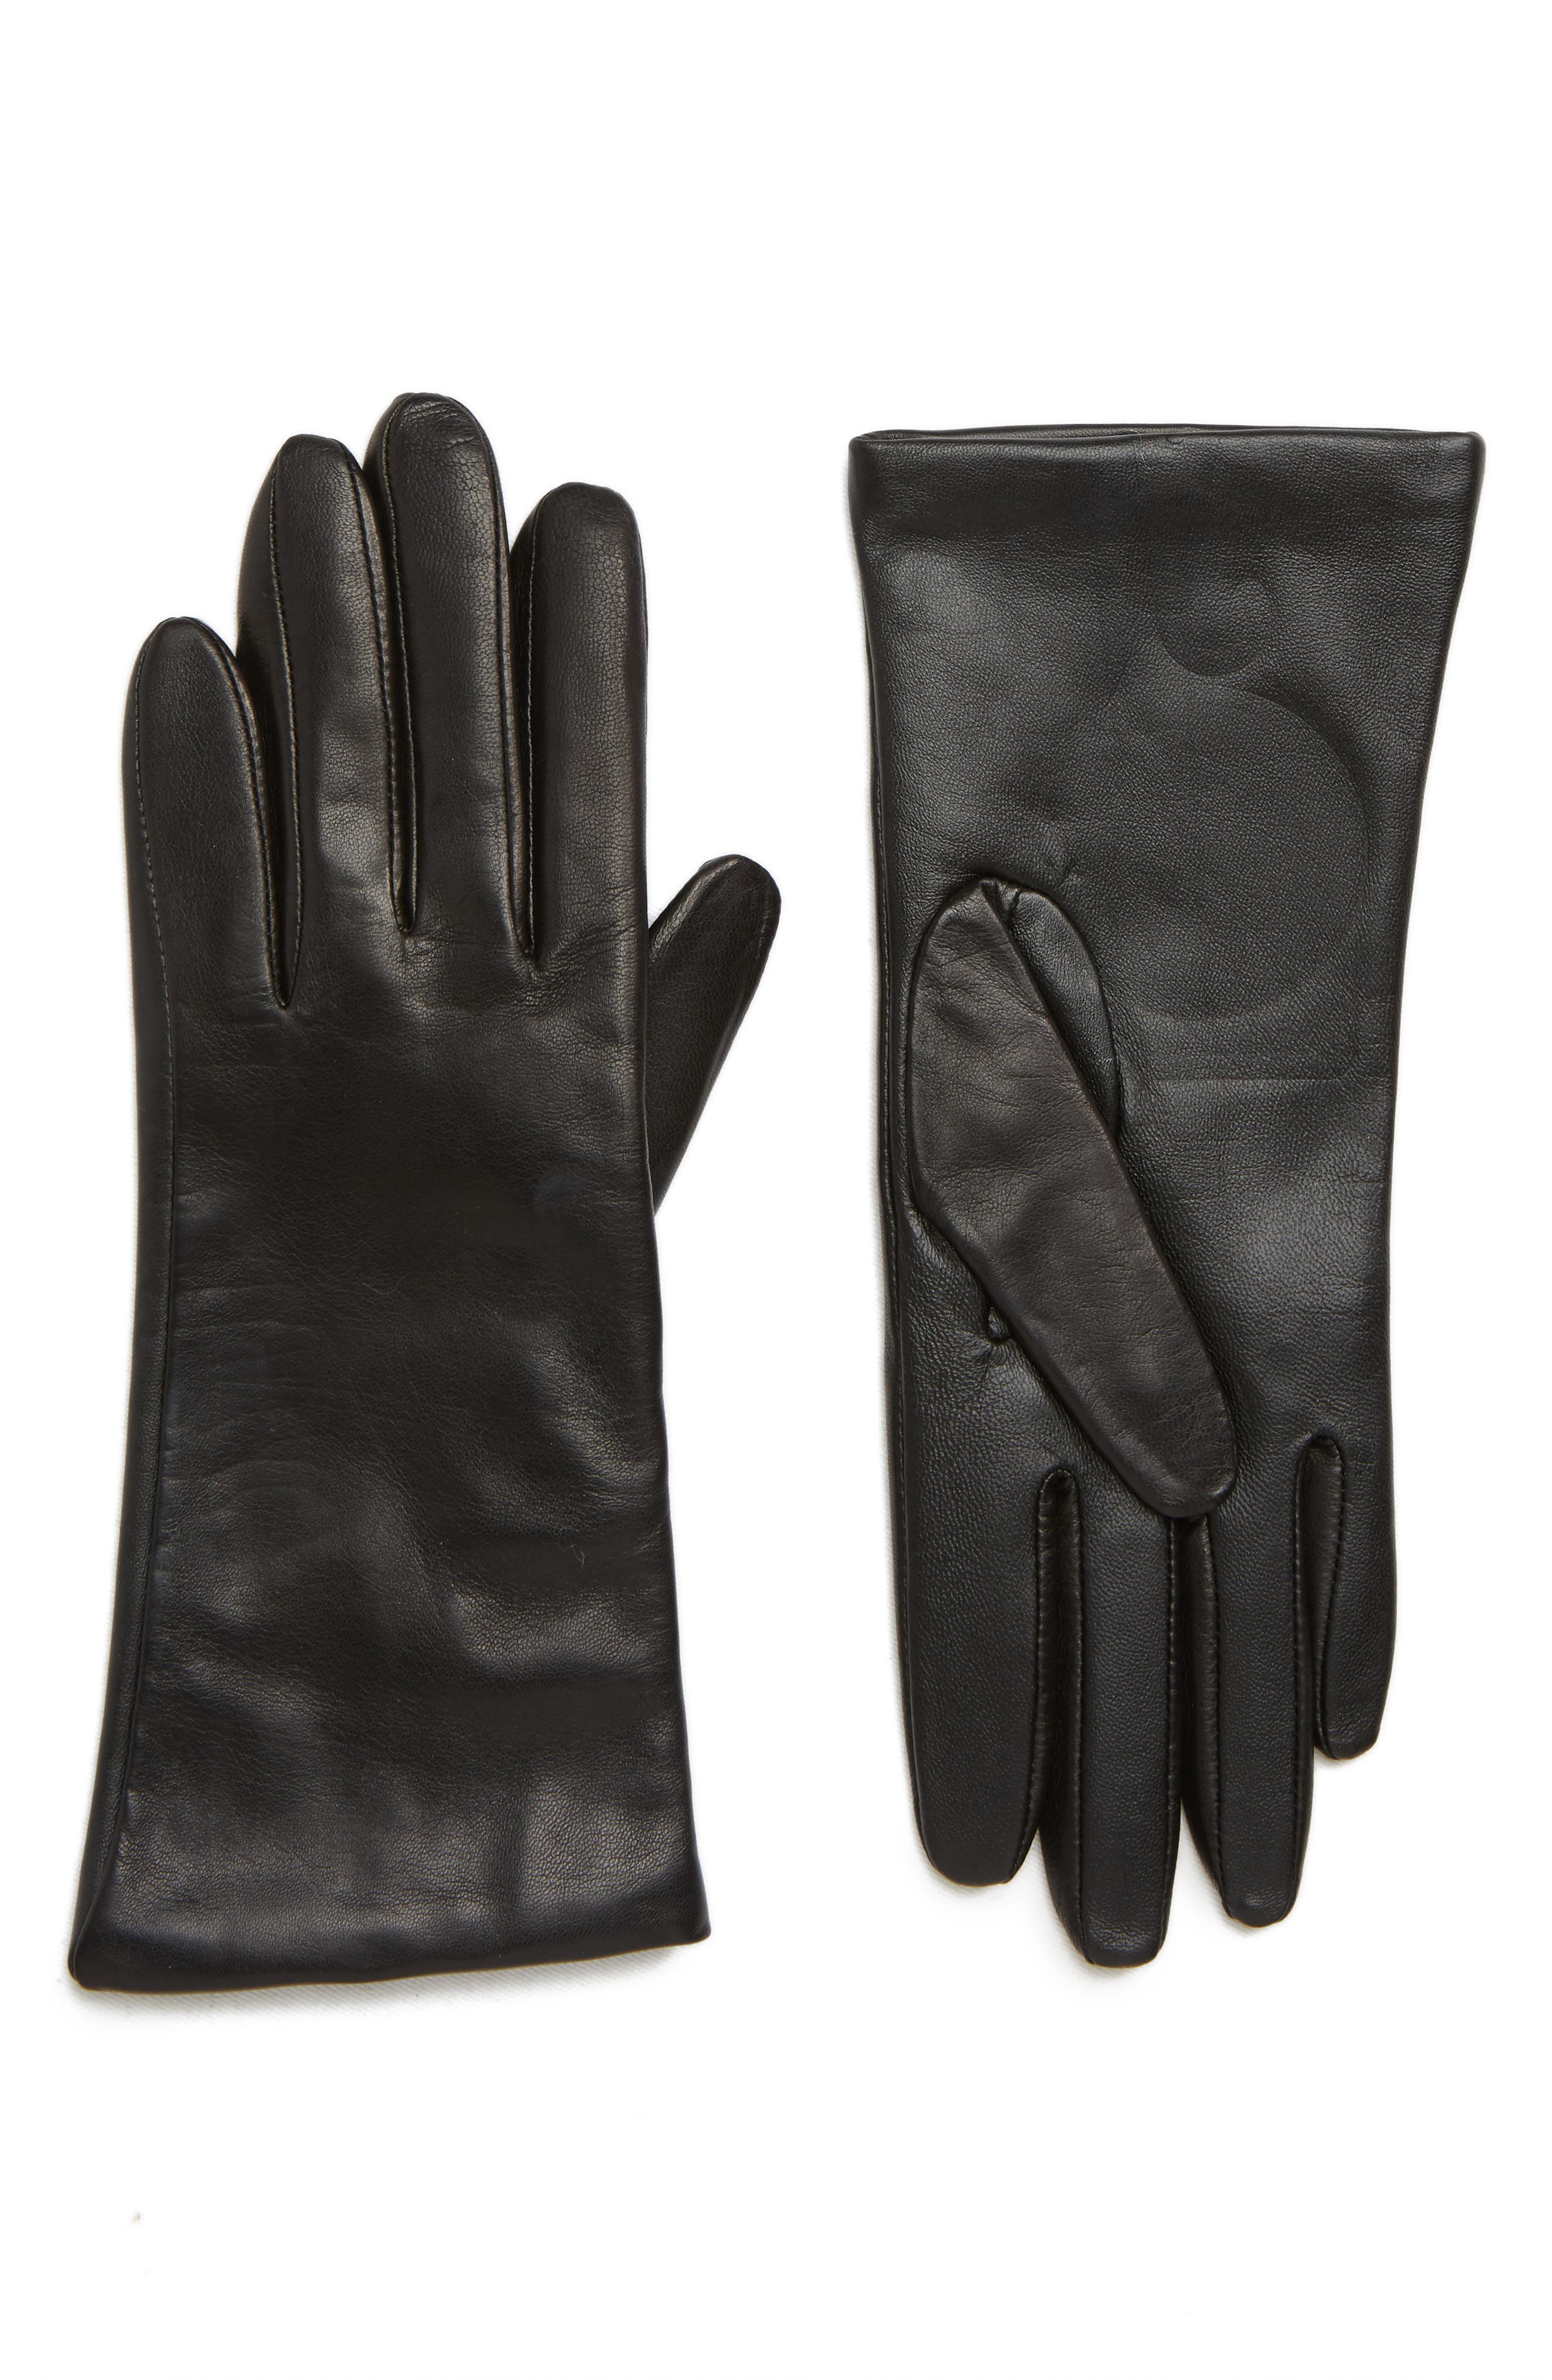 ZLUXURQ Mens Soft Lambskin Leather Touchscreen Winter Driving Gloves Cashmere or Fleece Lined,comfortable and warm